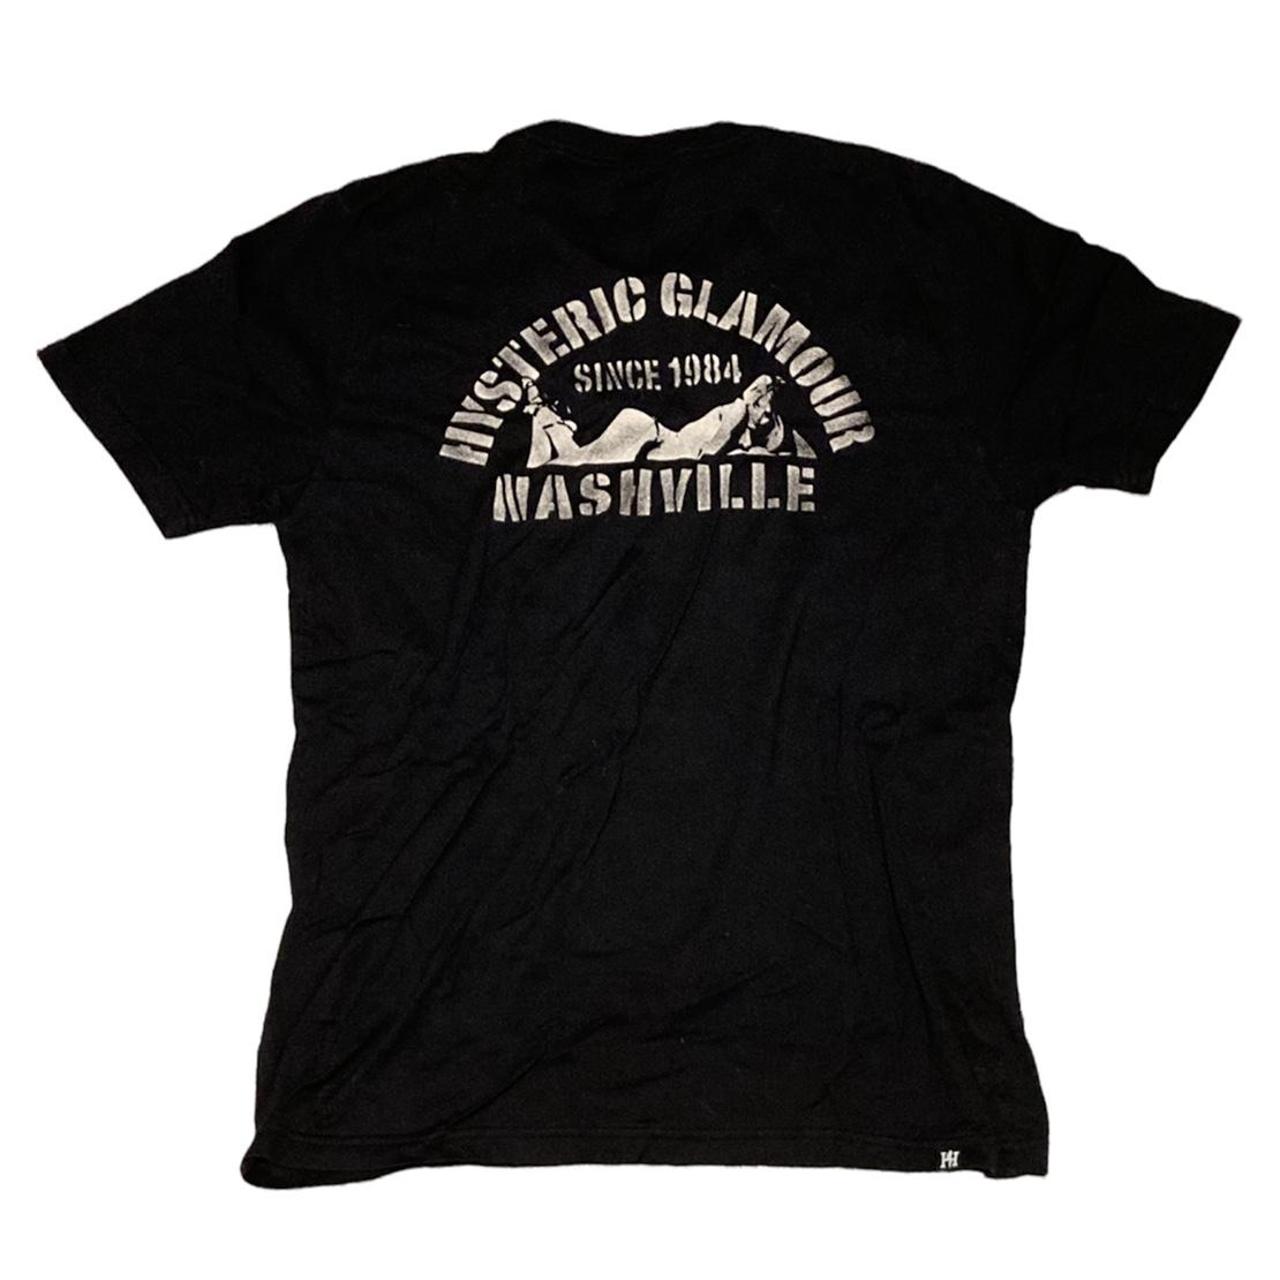 Hysteric Glamour “Nashville” Tee, Size: M, Great...